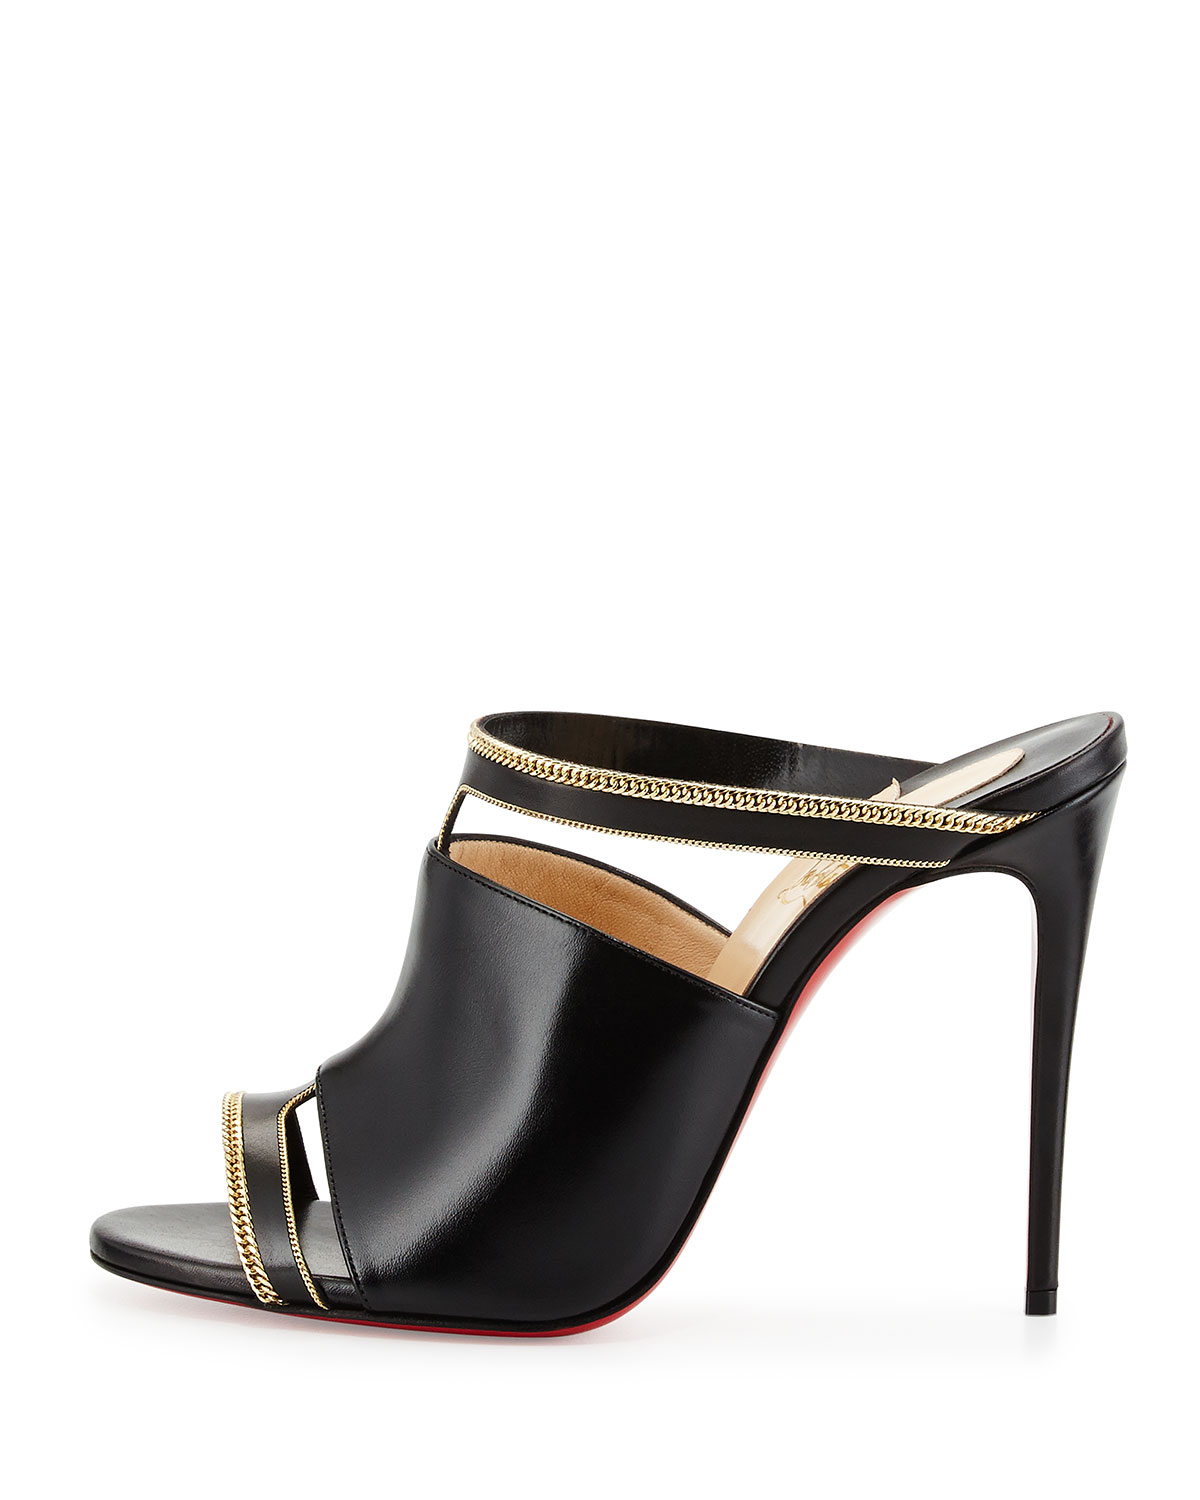 Lyst - Christian louboutin Akenana Cut-Out Leather Mules in Black